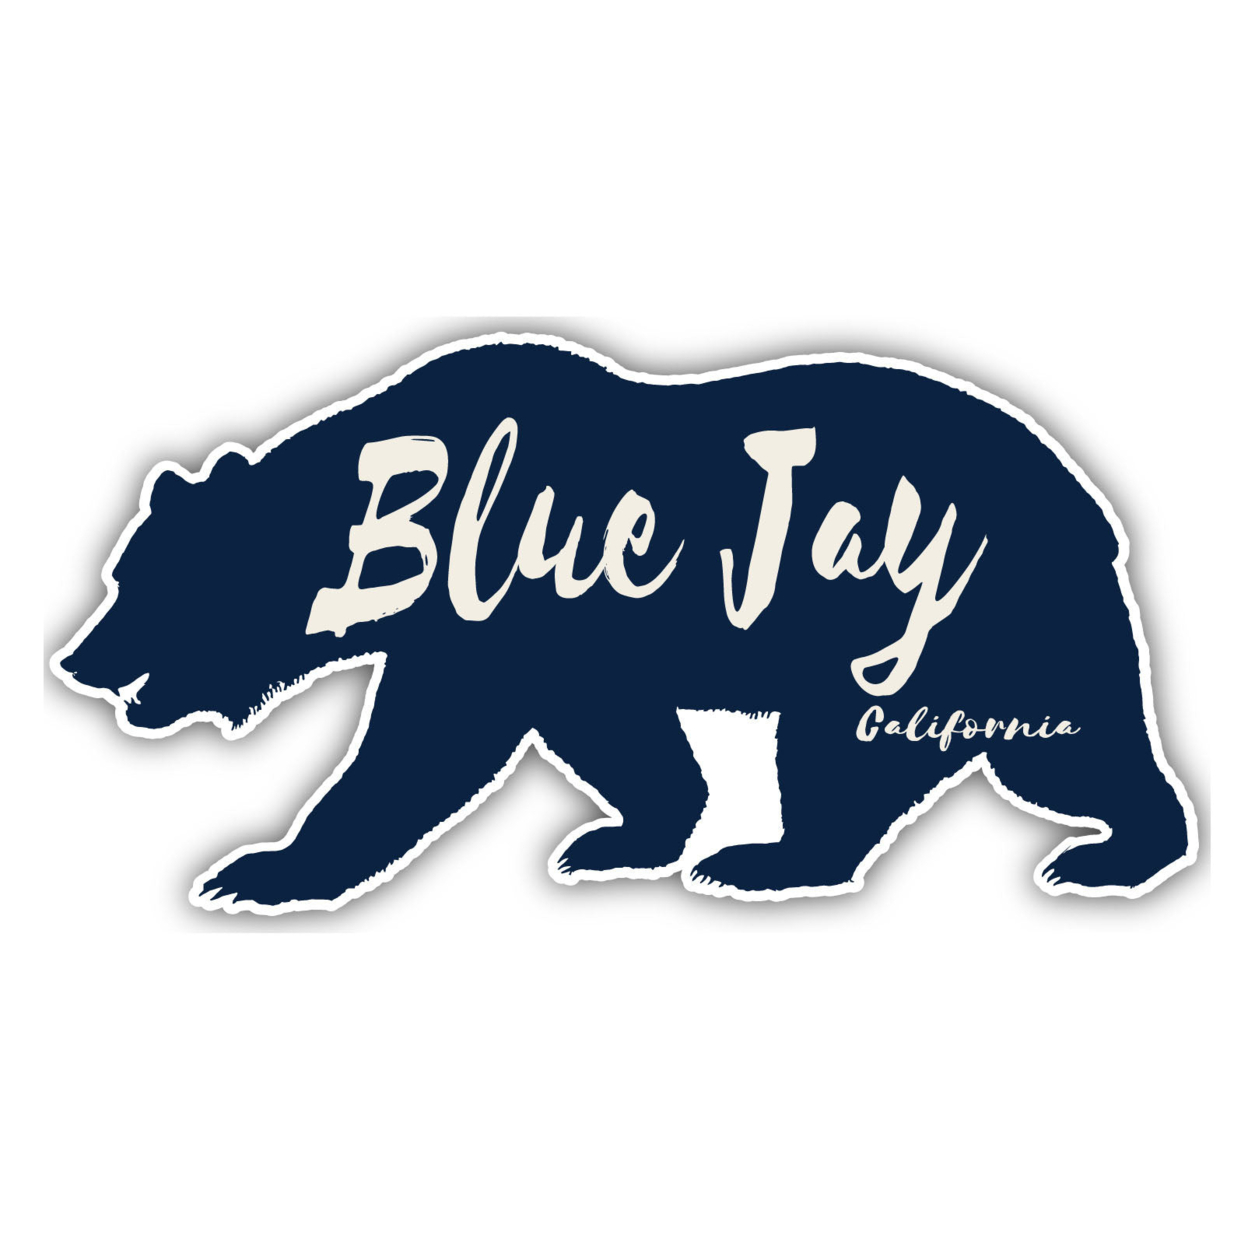 Blue Jay California Souvenir Decorative Stickers (Choose Theme And Size) - 4-Pack, 12-Inch, Bear